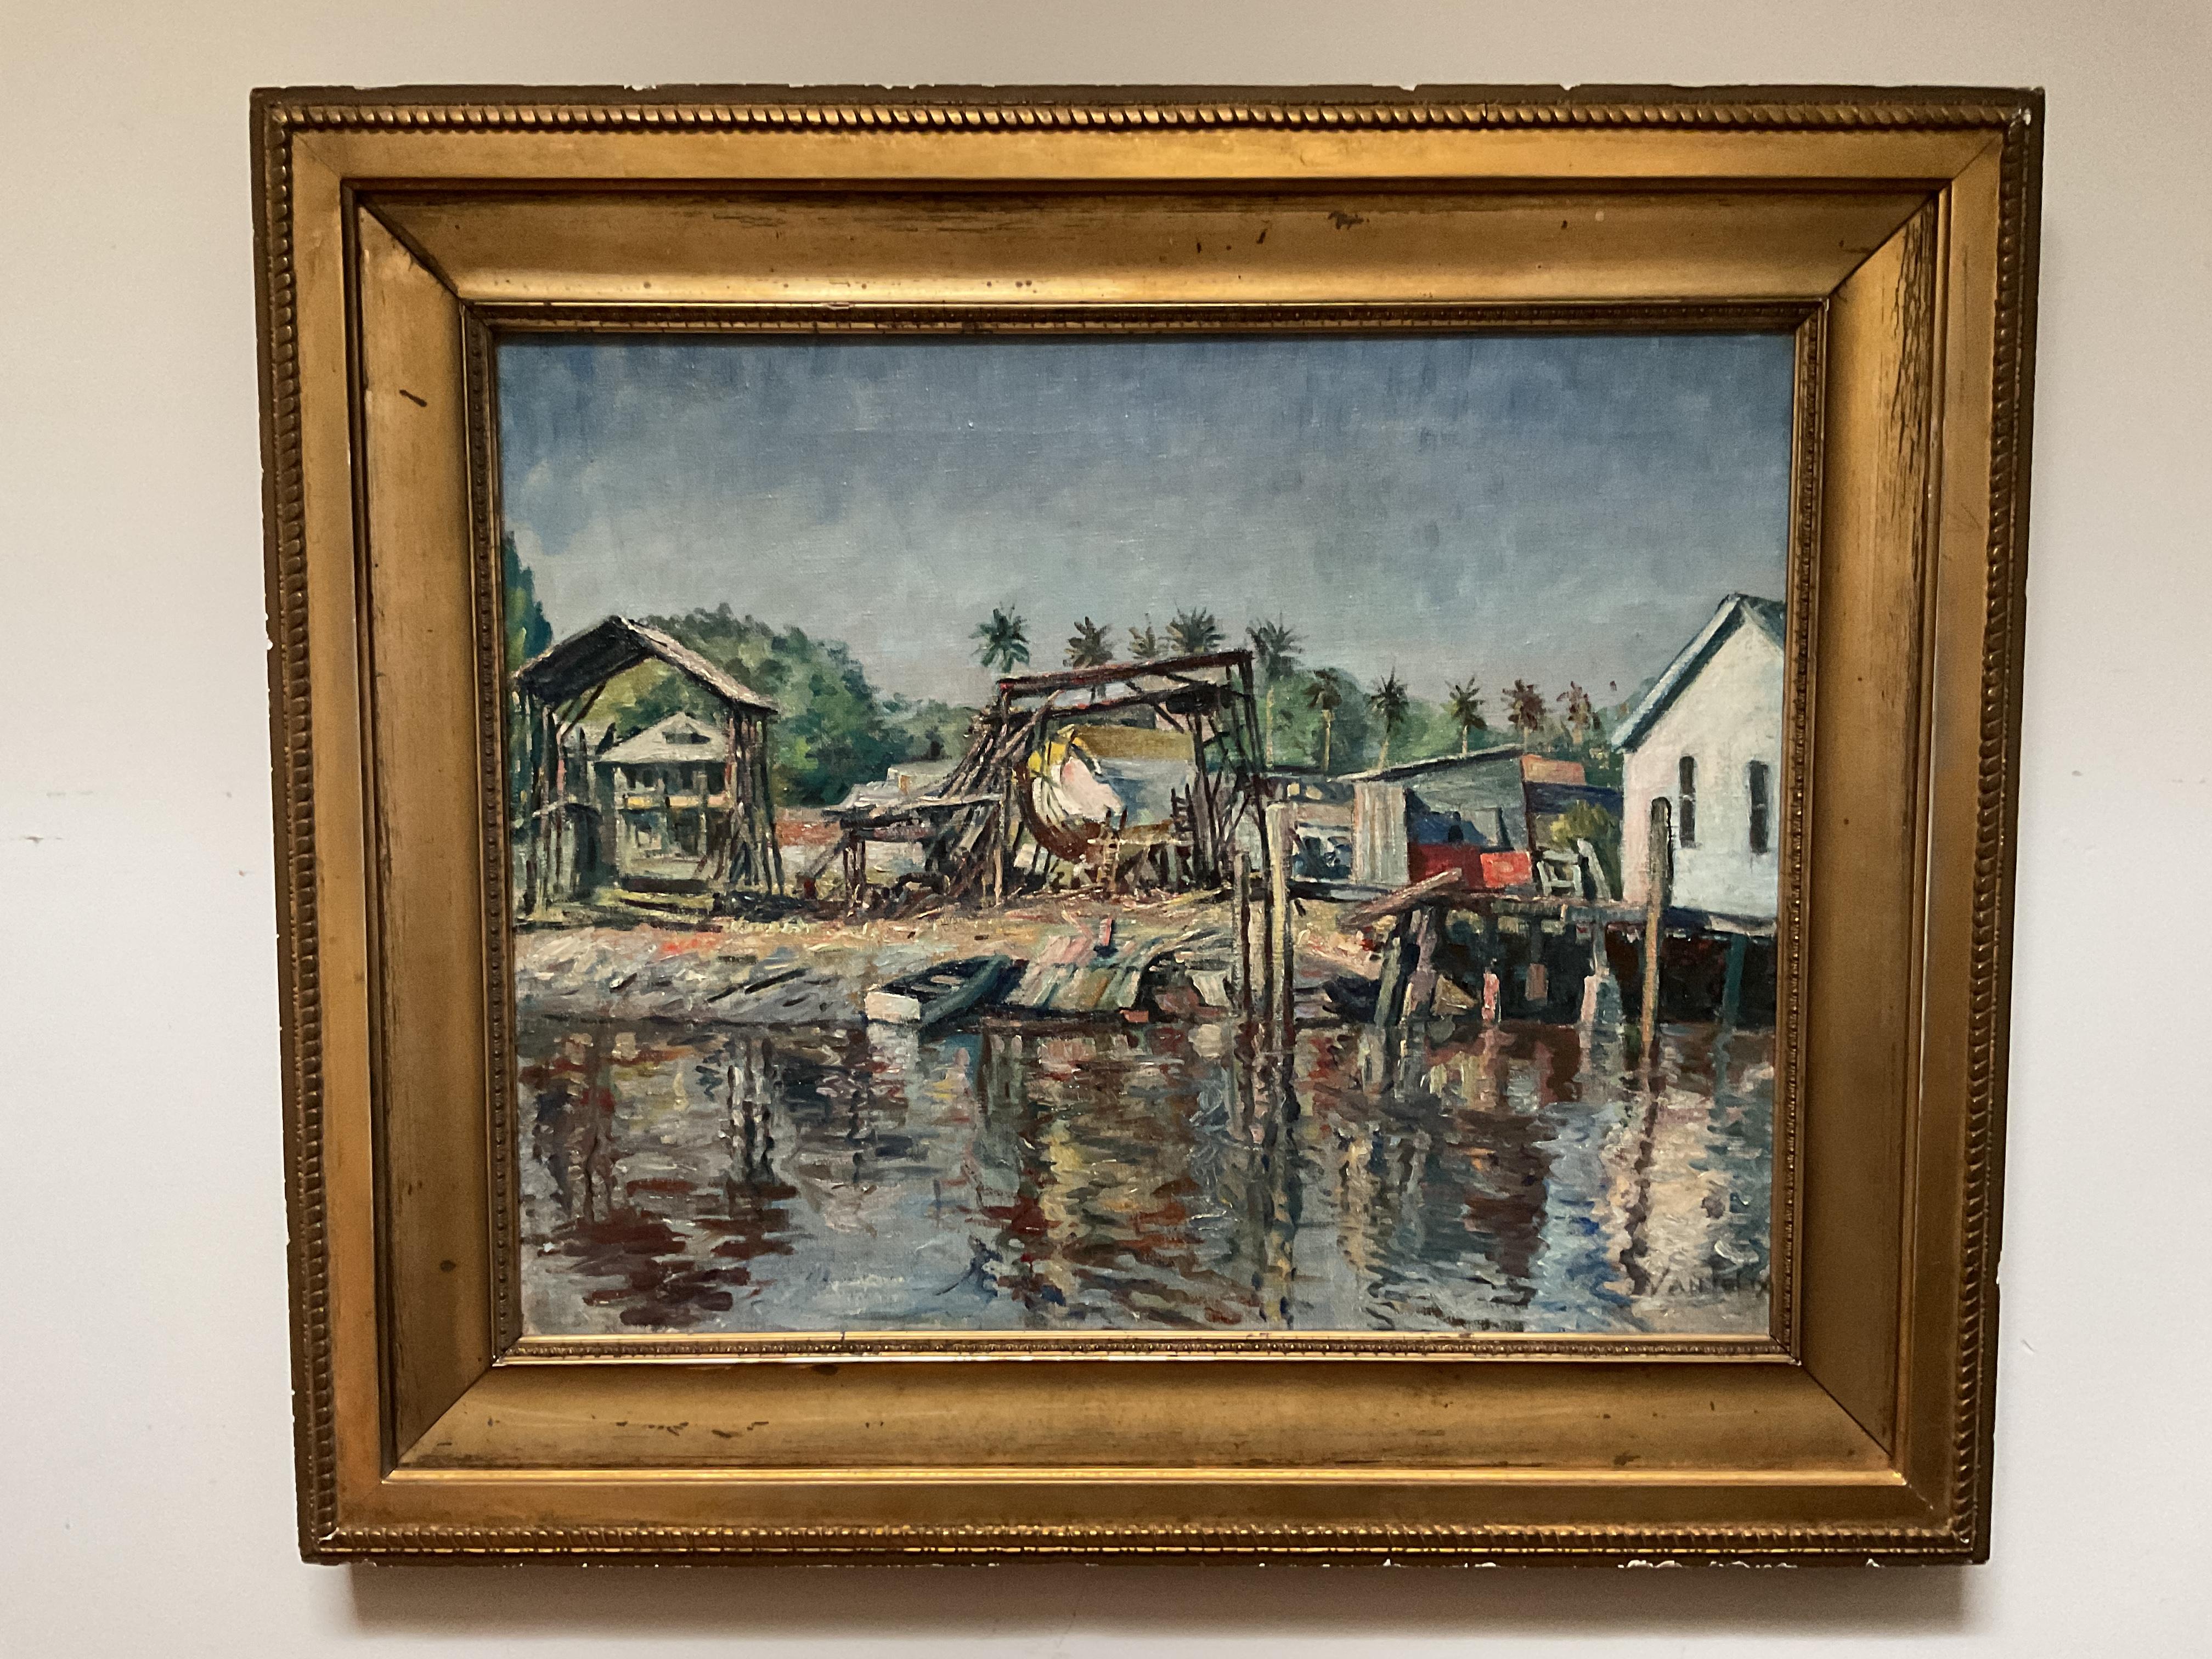 This is a colorful oil painting by listed American artist Maurice Van Felix. It portrays a boat landing or lift along a harbor location. It must be Florida as there is a line of palm trees in the background and the light is very bright.  The